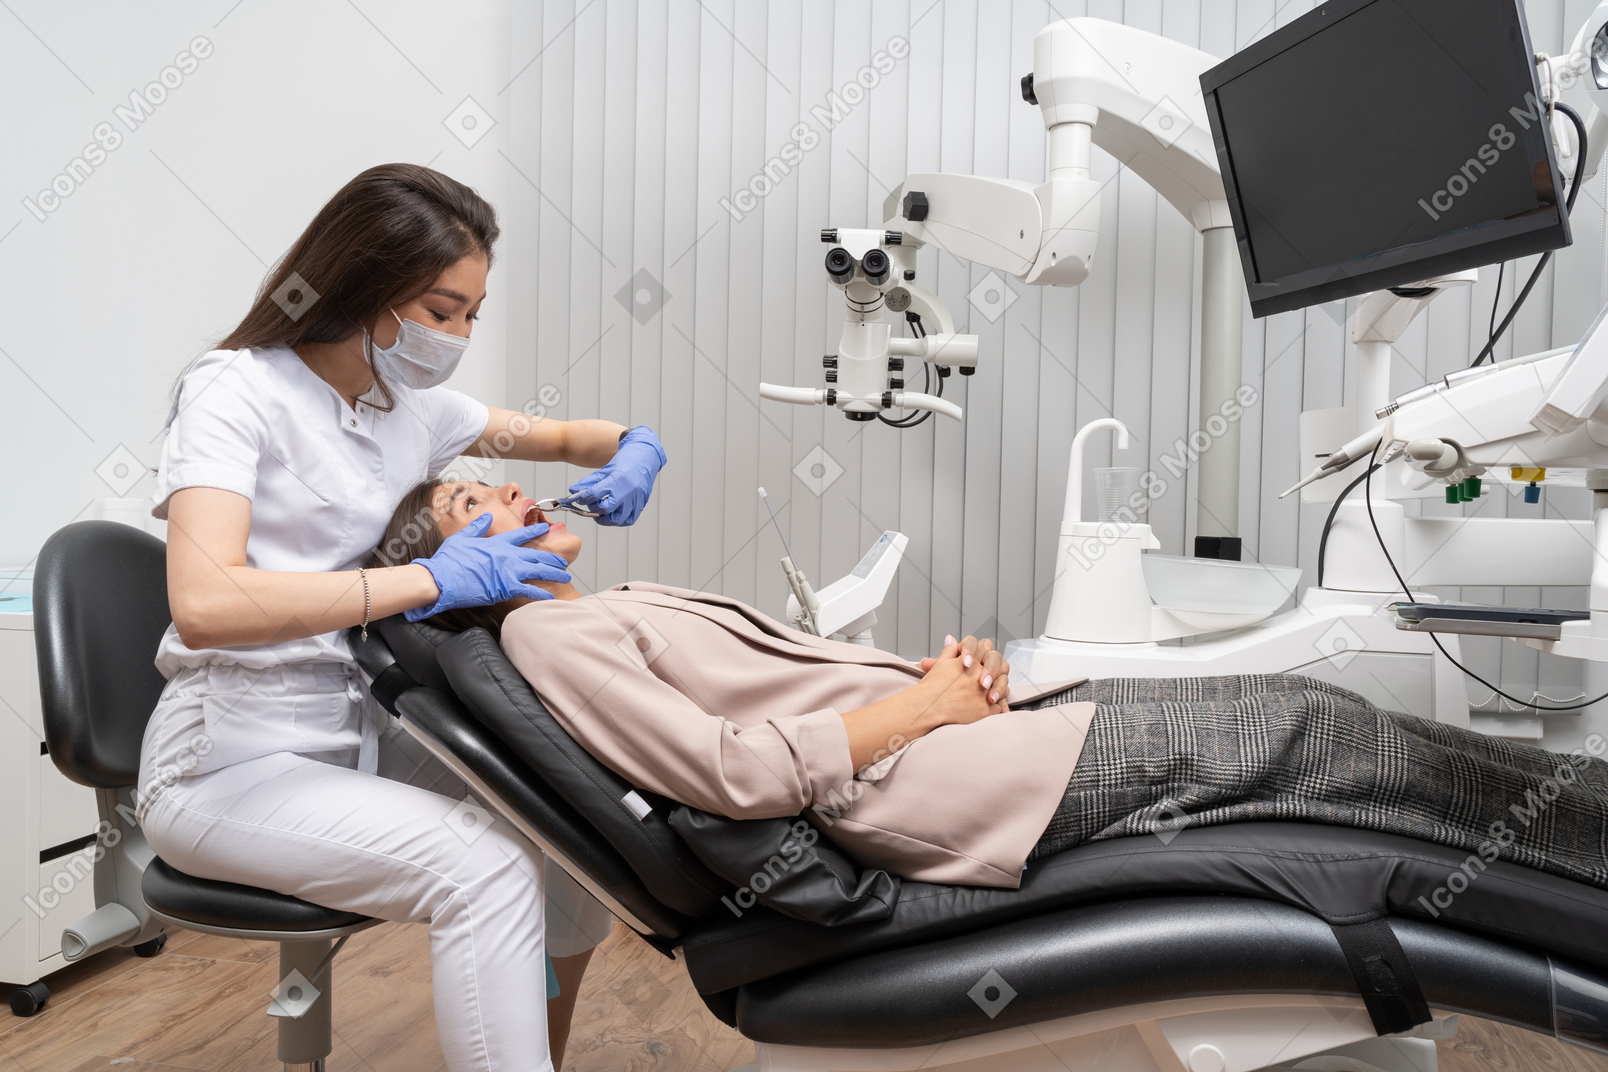 Full-length of a female dentist enjoying the process of examining her patient